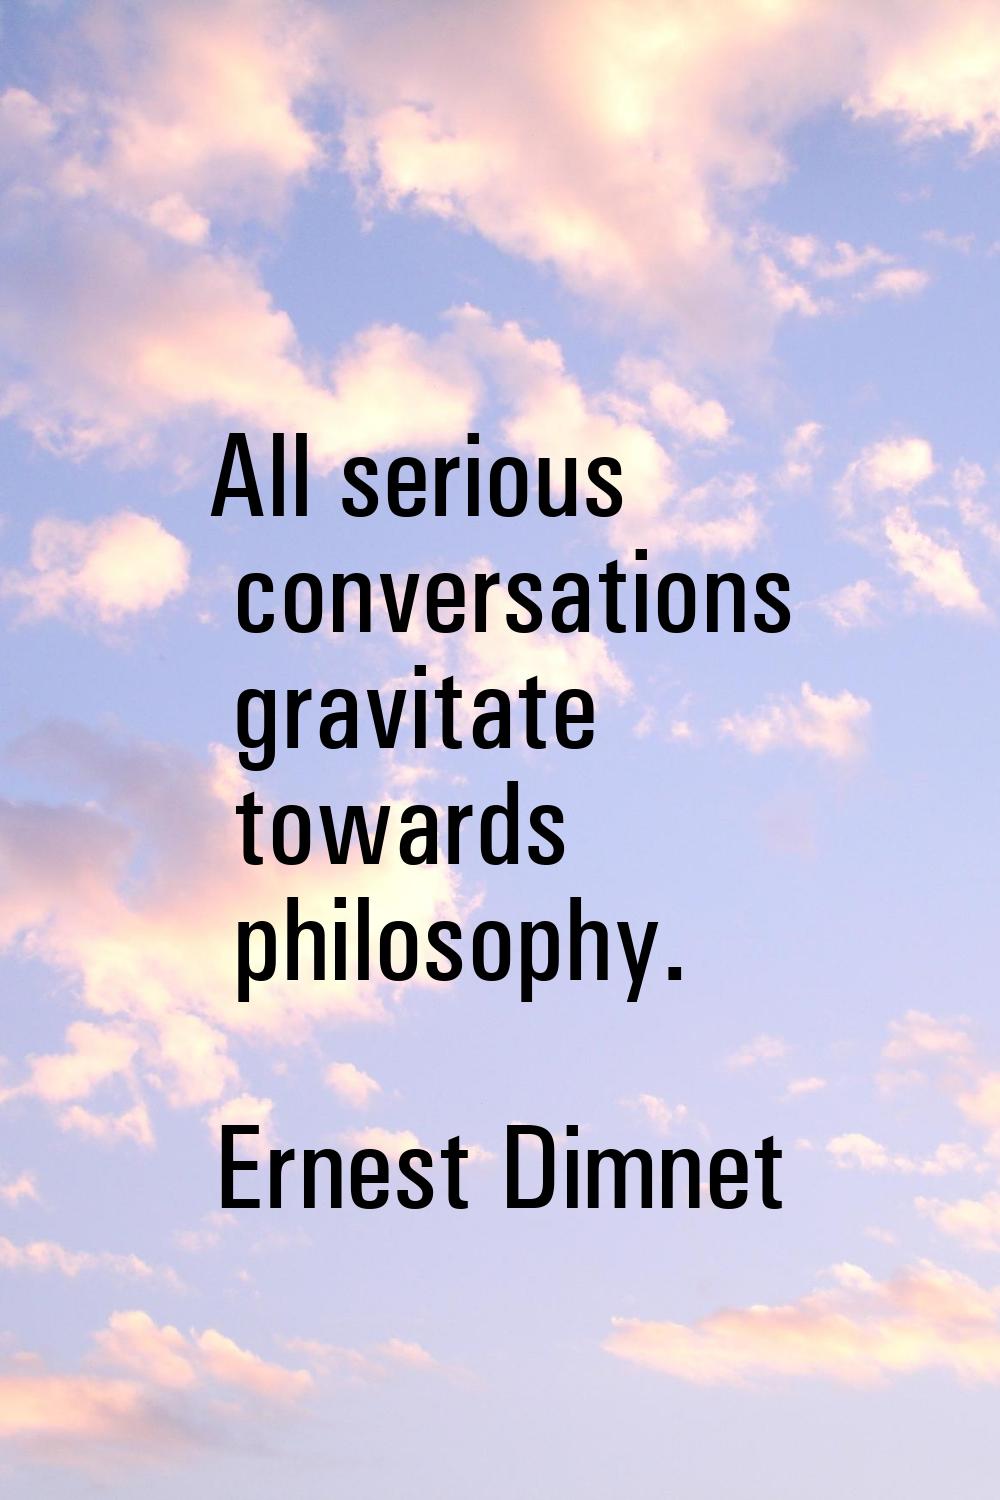 All serious conversations gravitate towards philosophy.